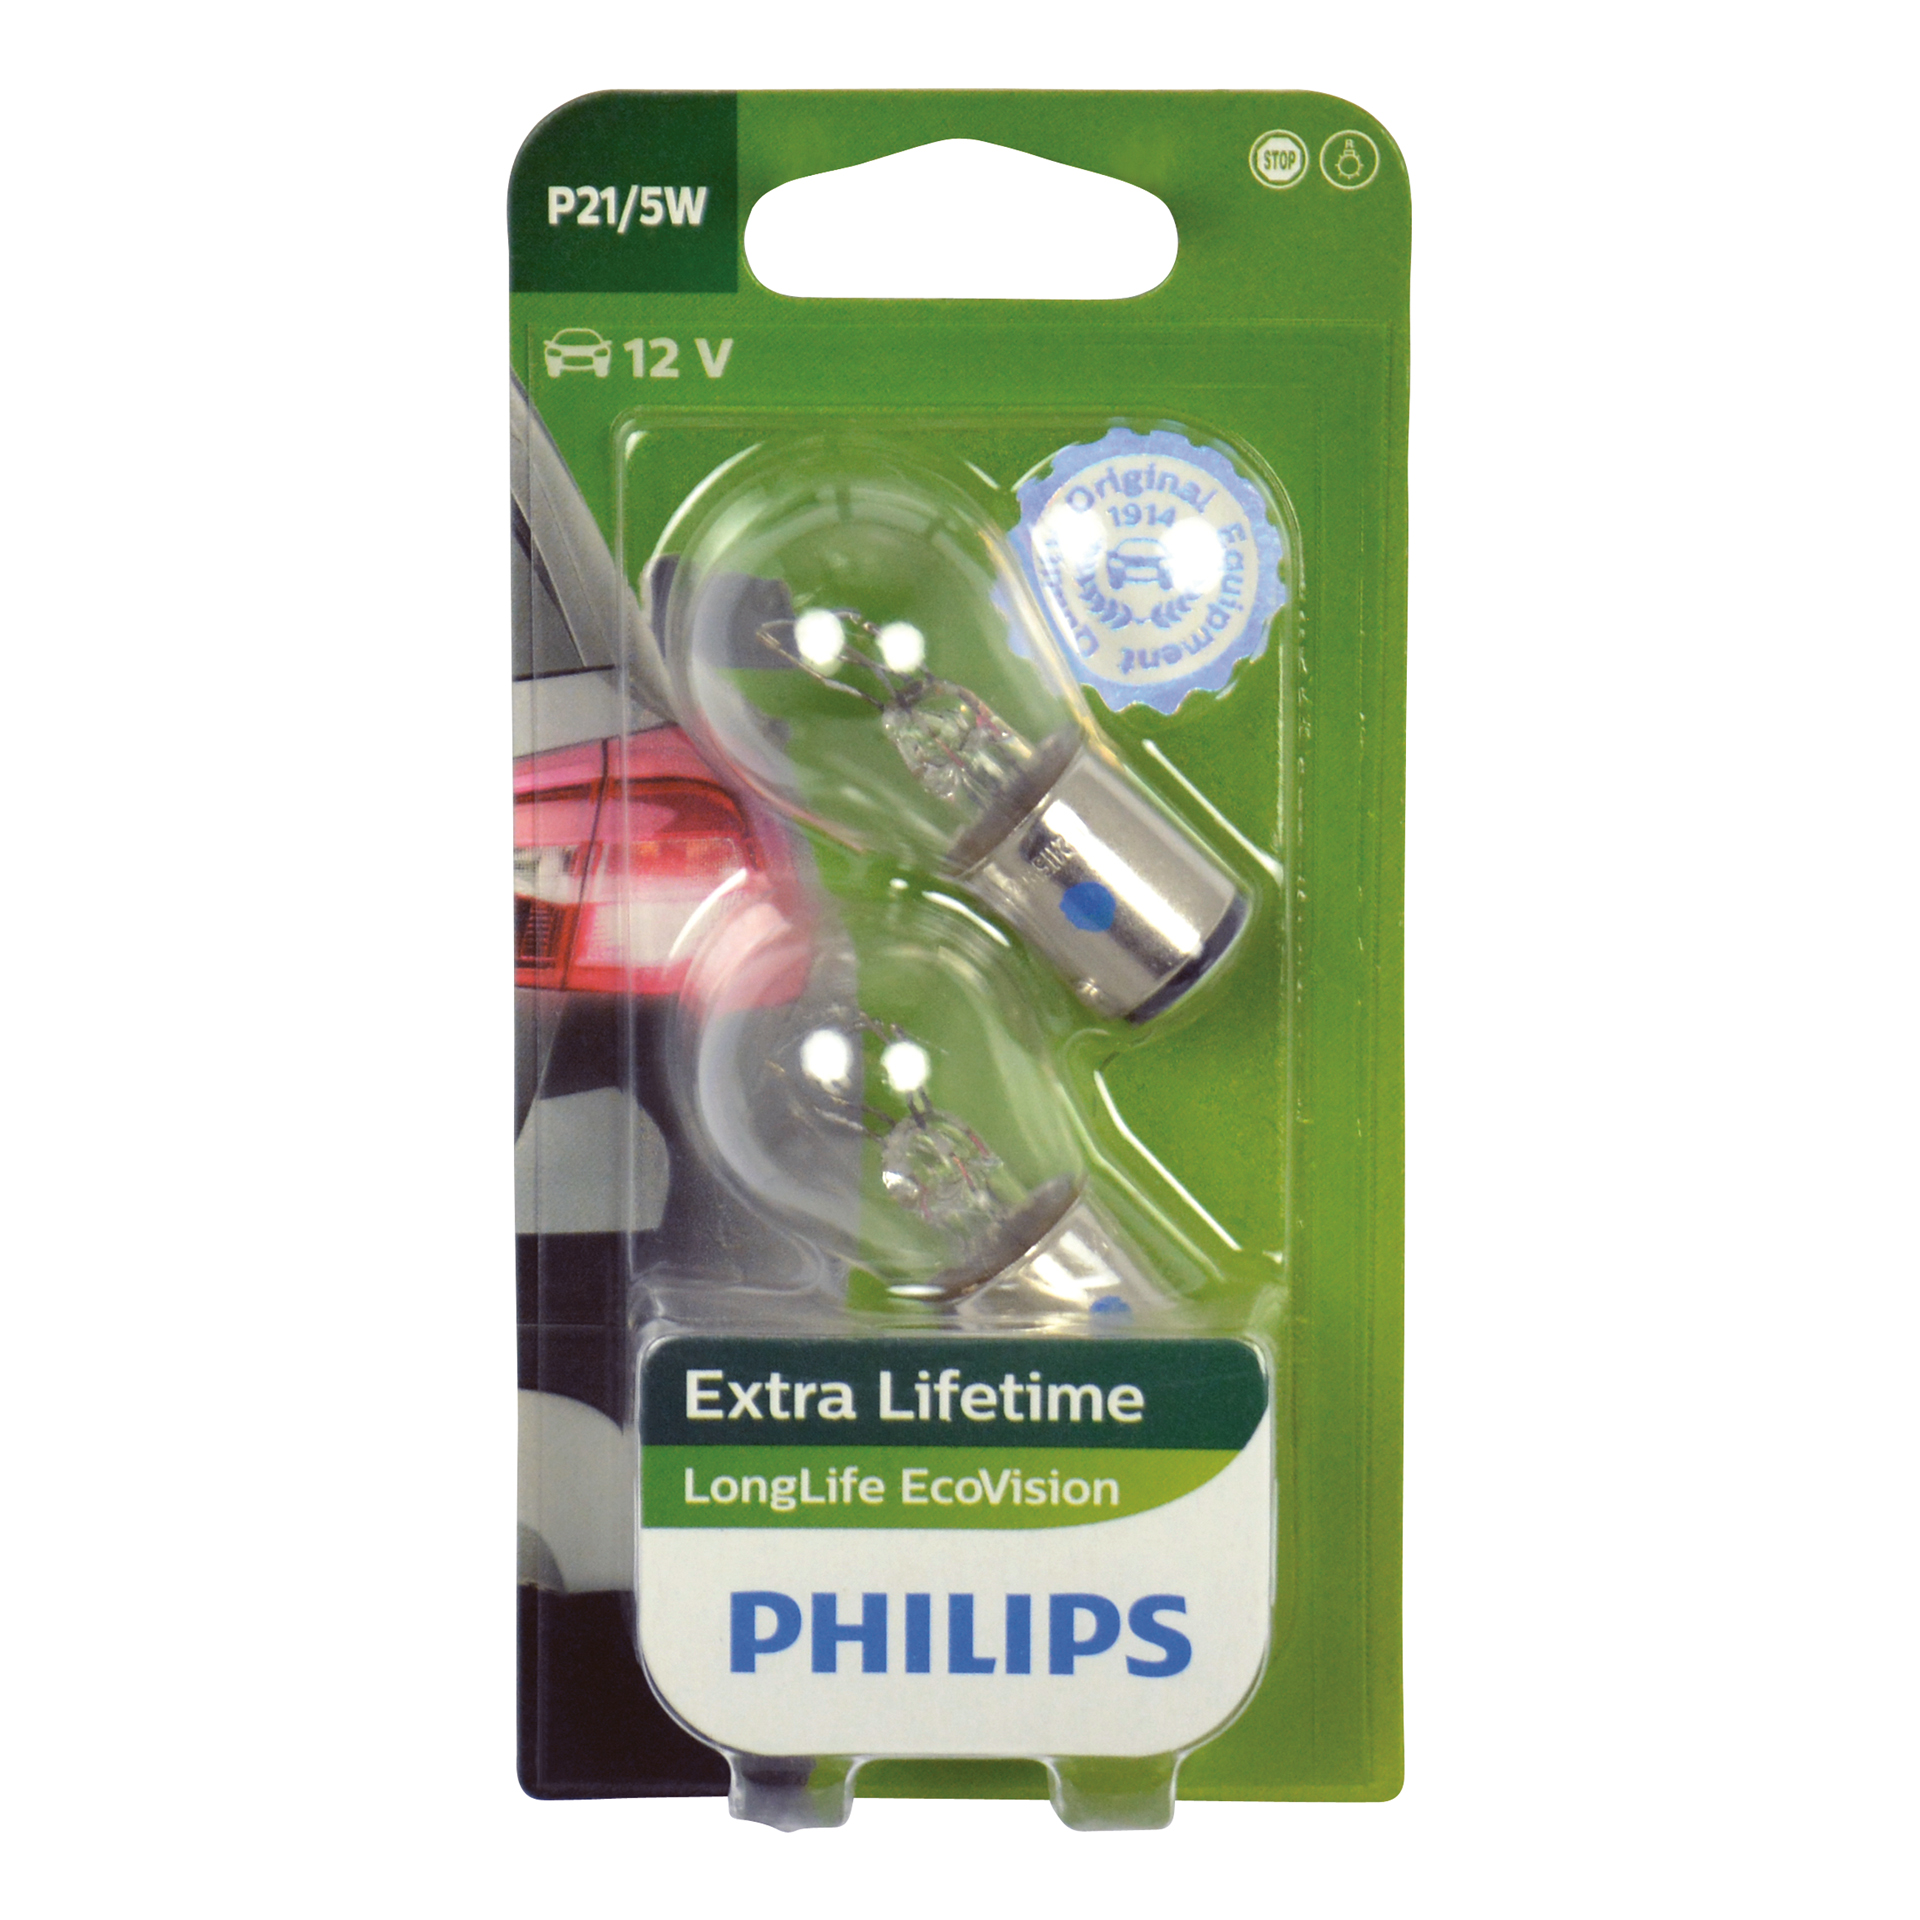 Philips Philips 12499LLECOB2 P21/5W EcoVision 5W blister 0730522